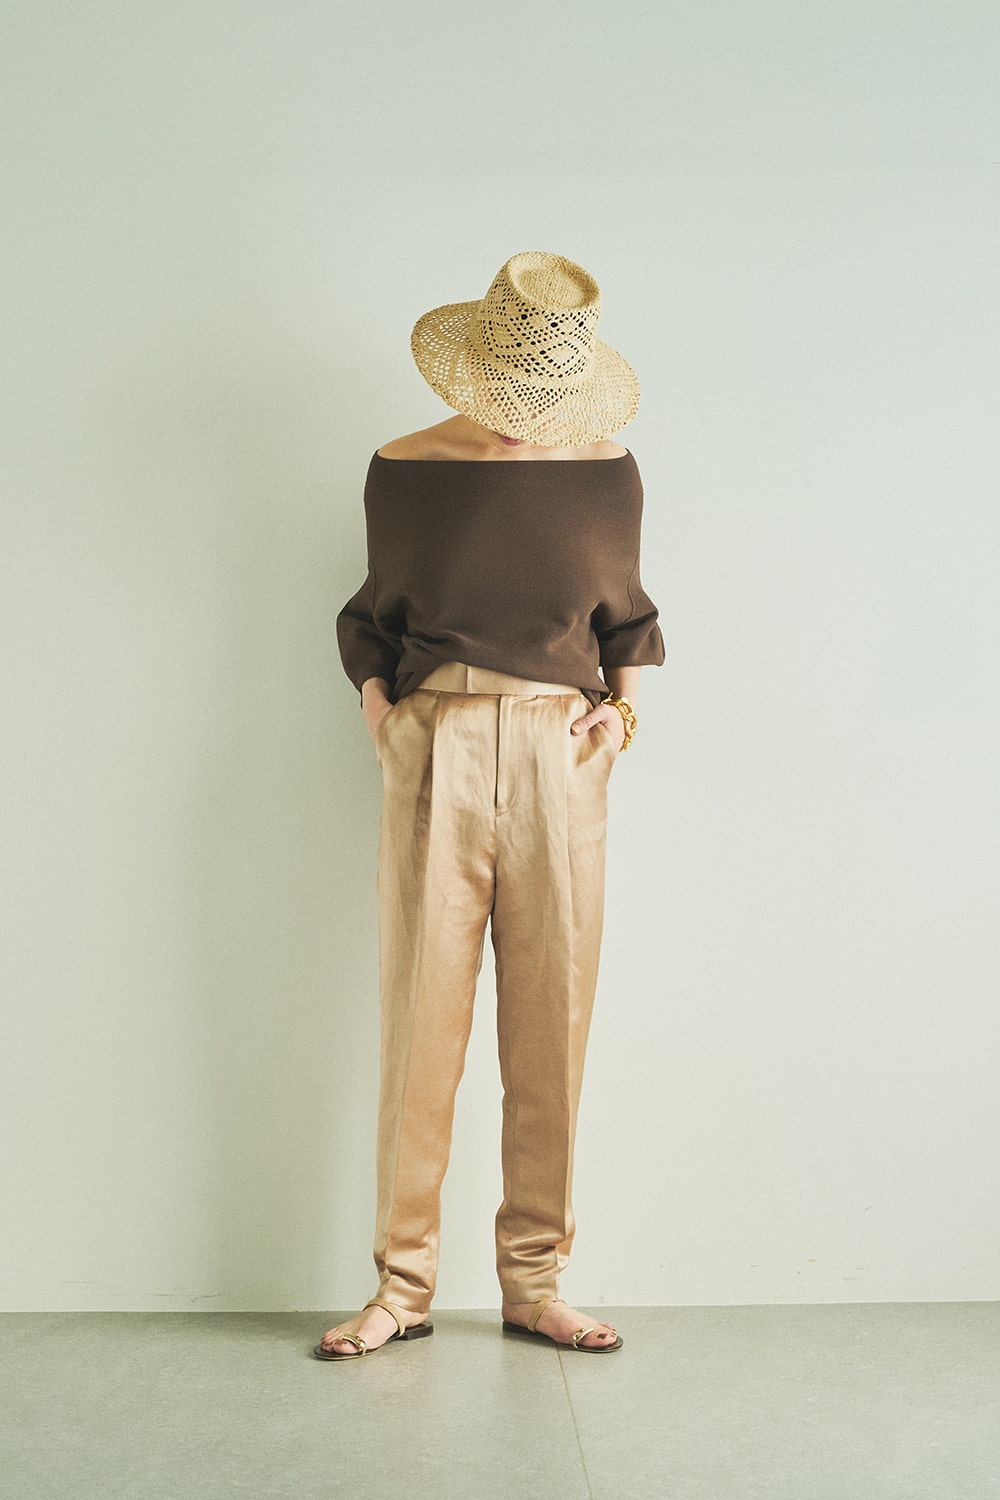 【WhimGazette】2021 Early Summer WEB LIITED ITEMS